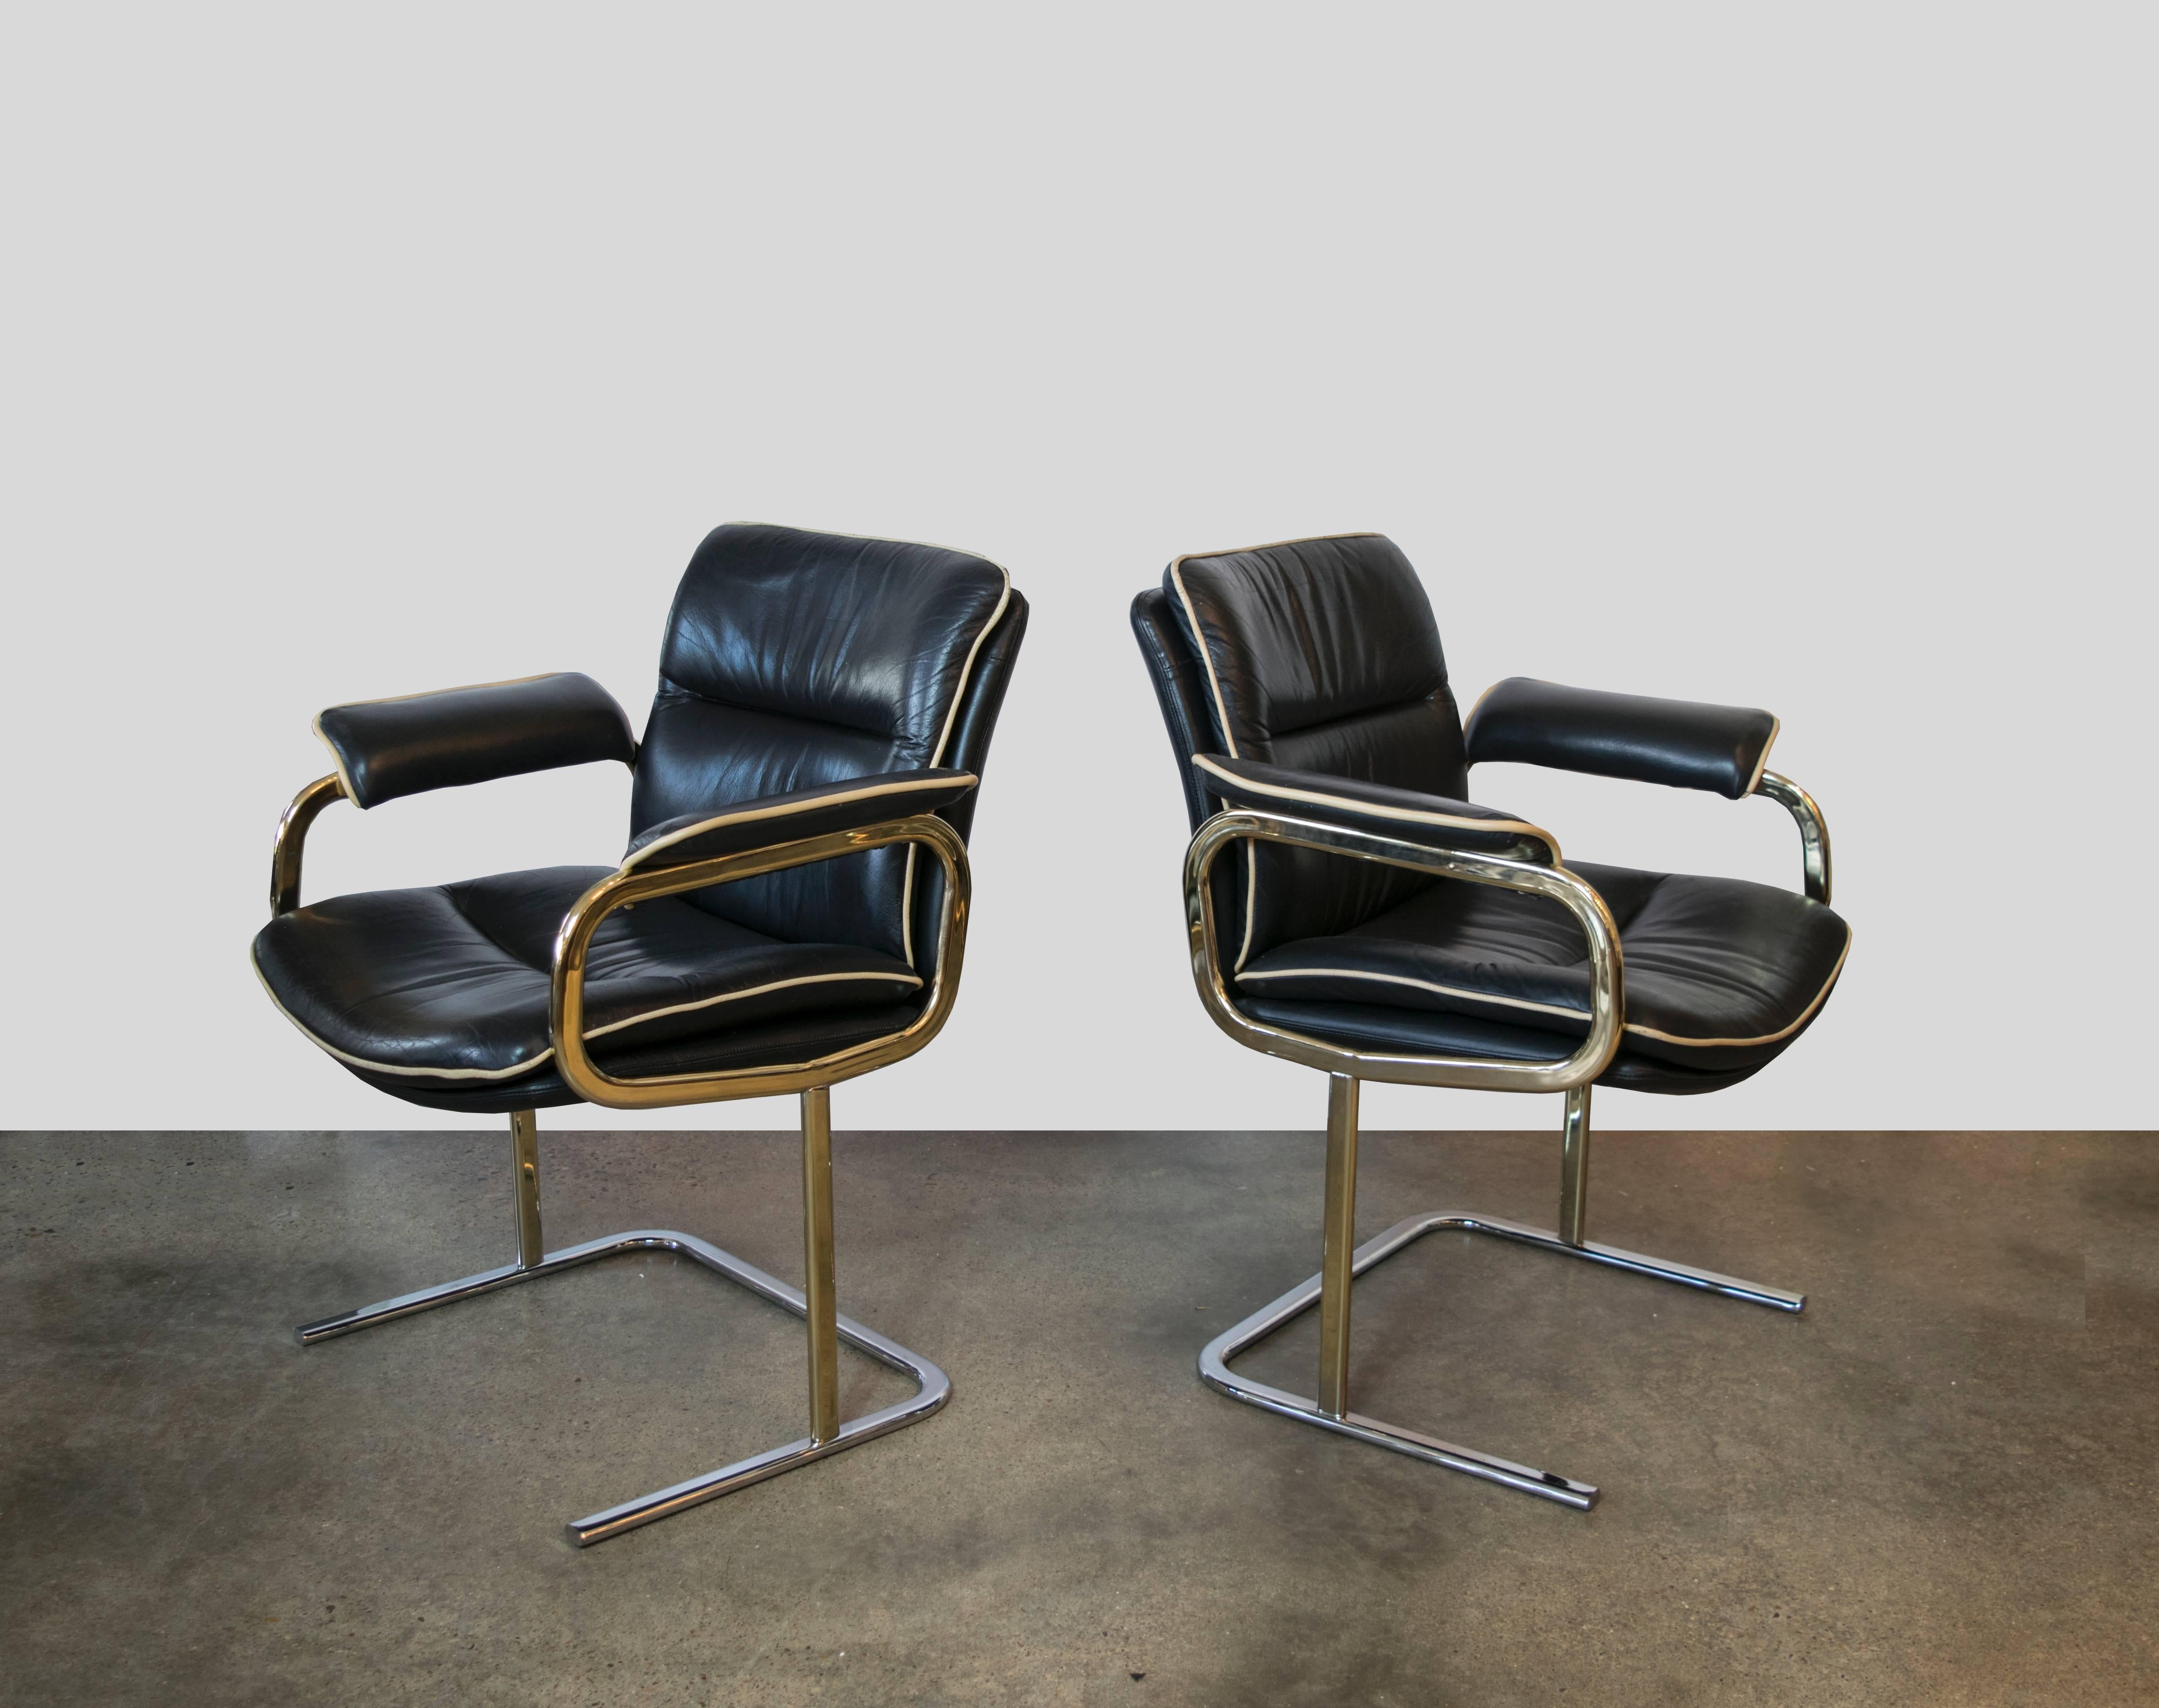 This black leather chair with matching ivory leather piping is highly unusual in its design. The rounded looped arms are topped with padded armrests and the brass chair is complemented by a chrome base. One available only.